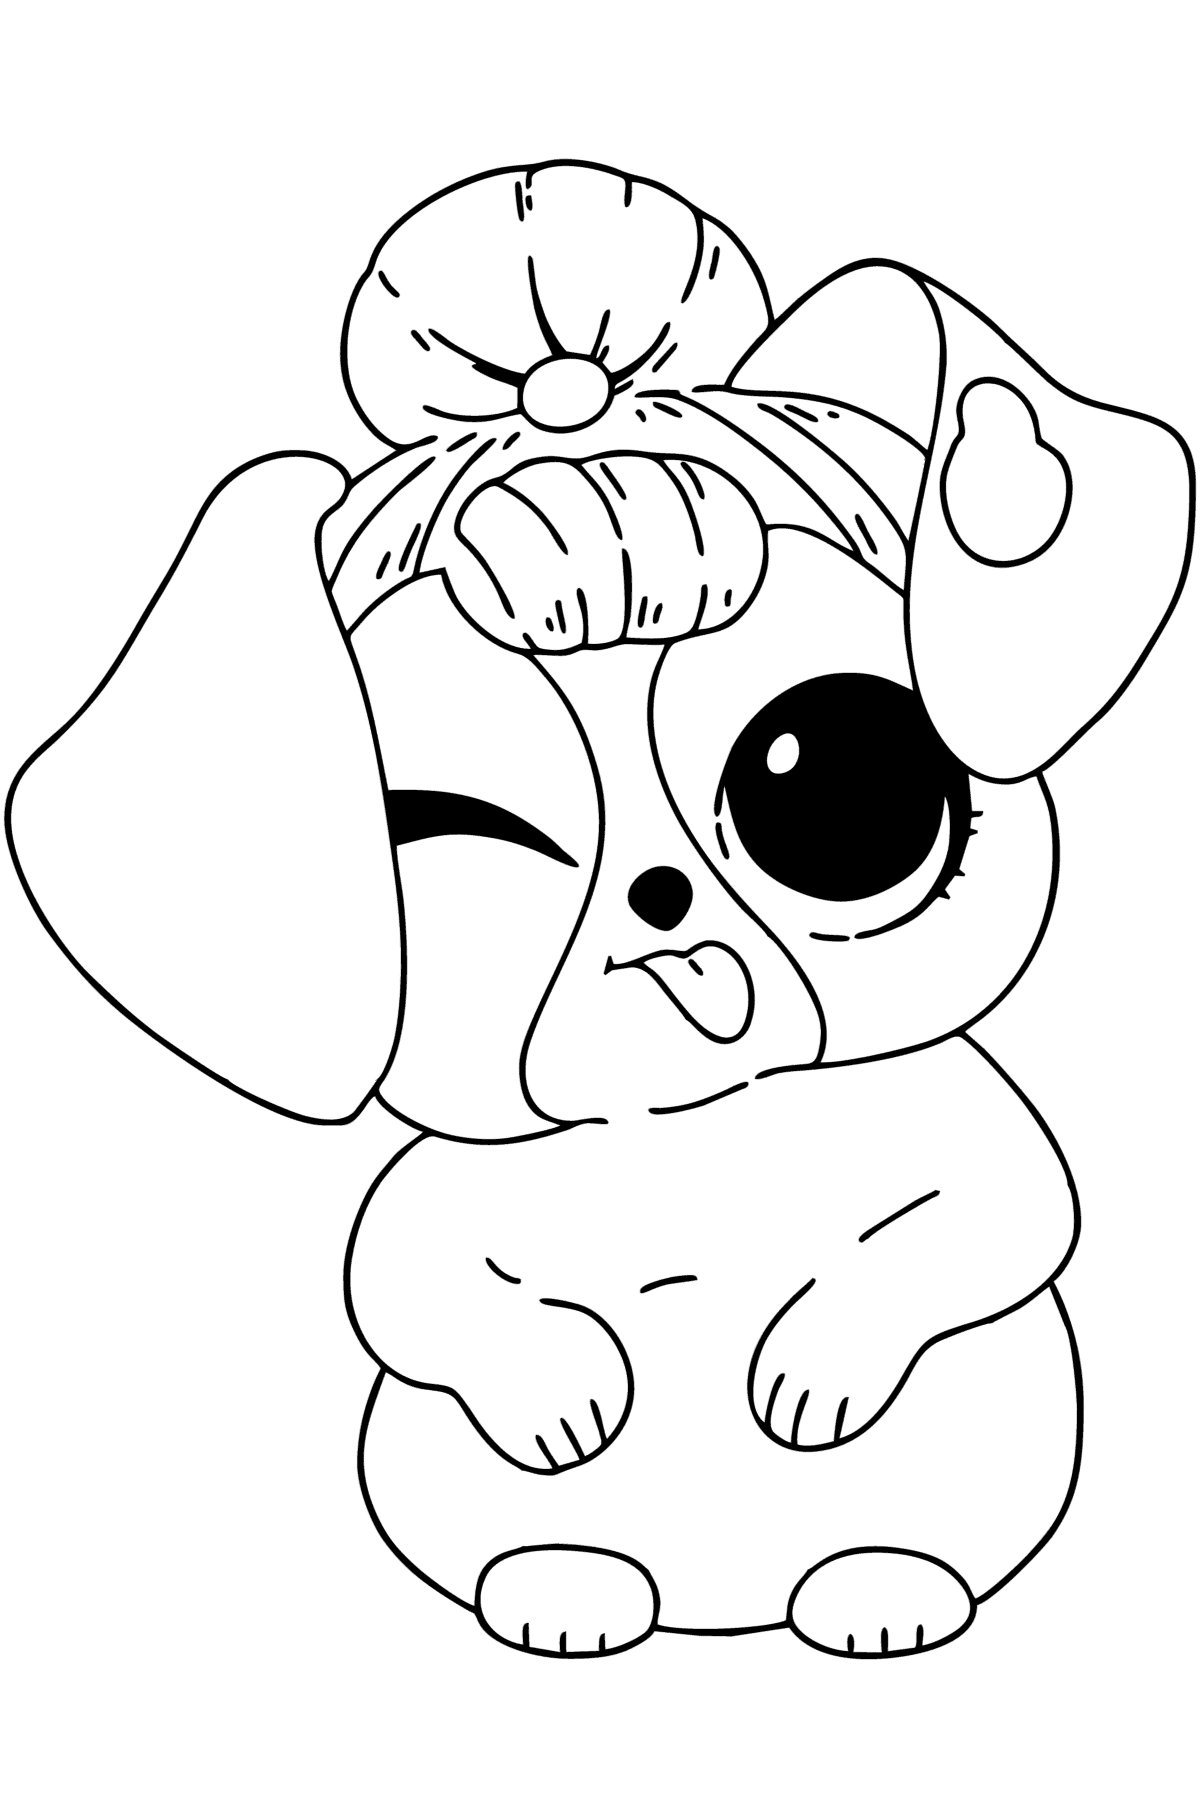 Coloring page LOL pet cute puppy - Coloring Pages for Kids